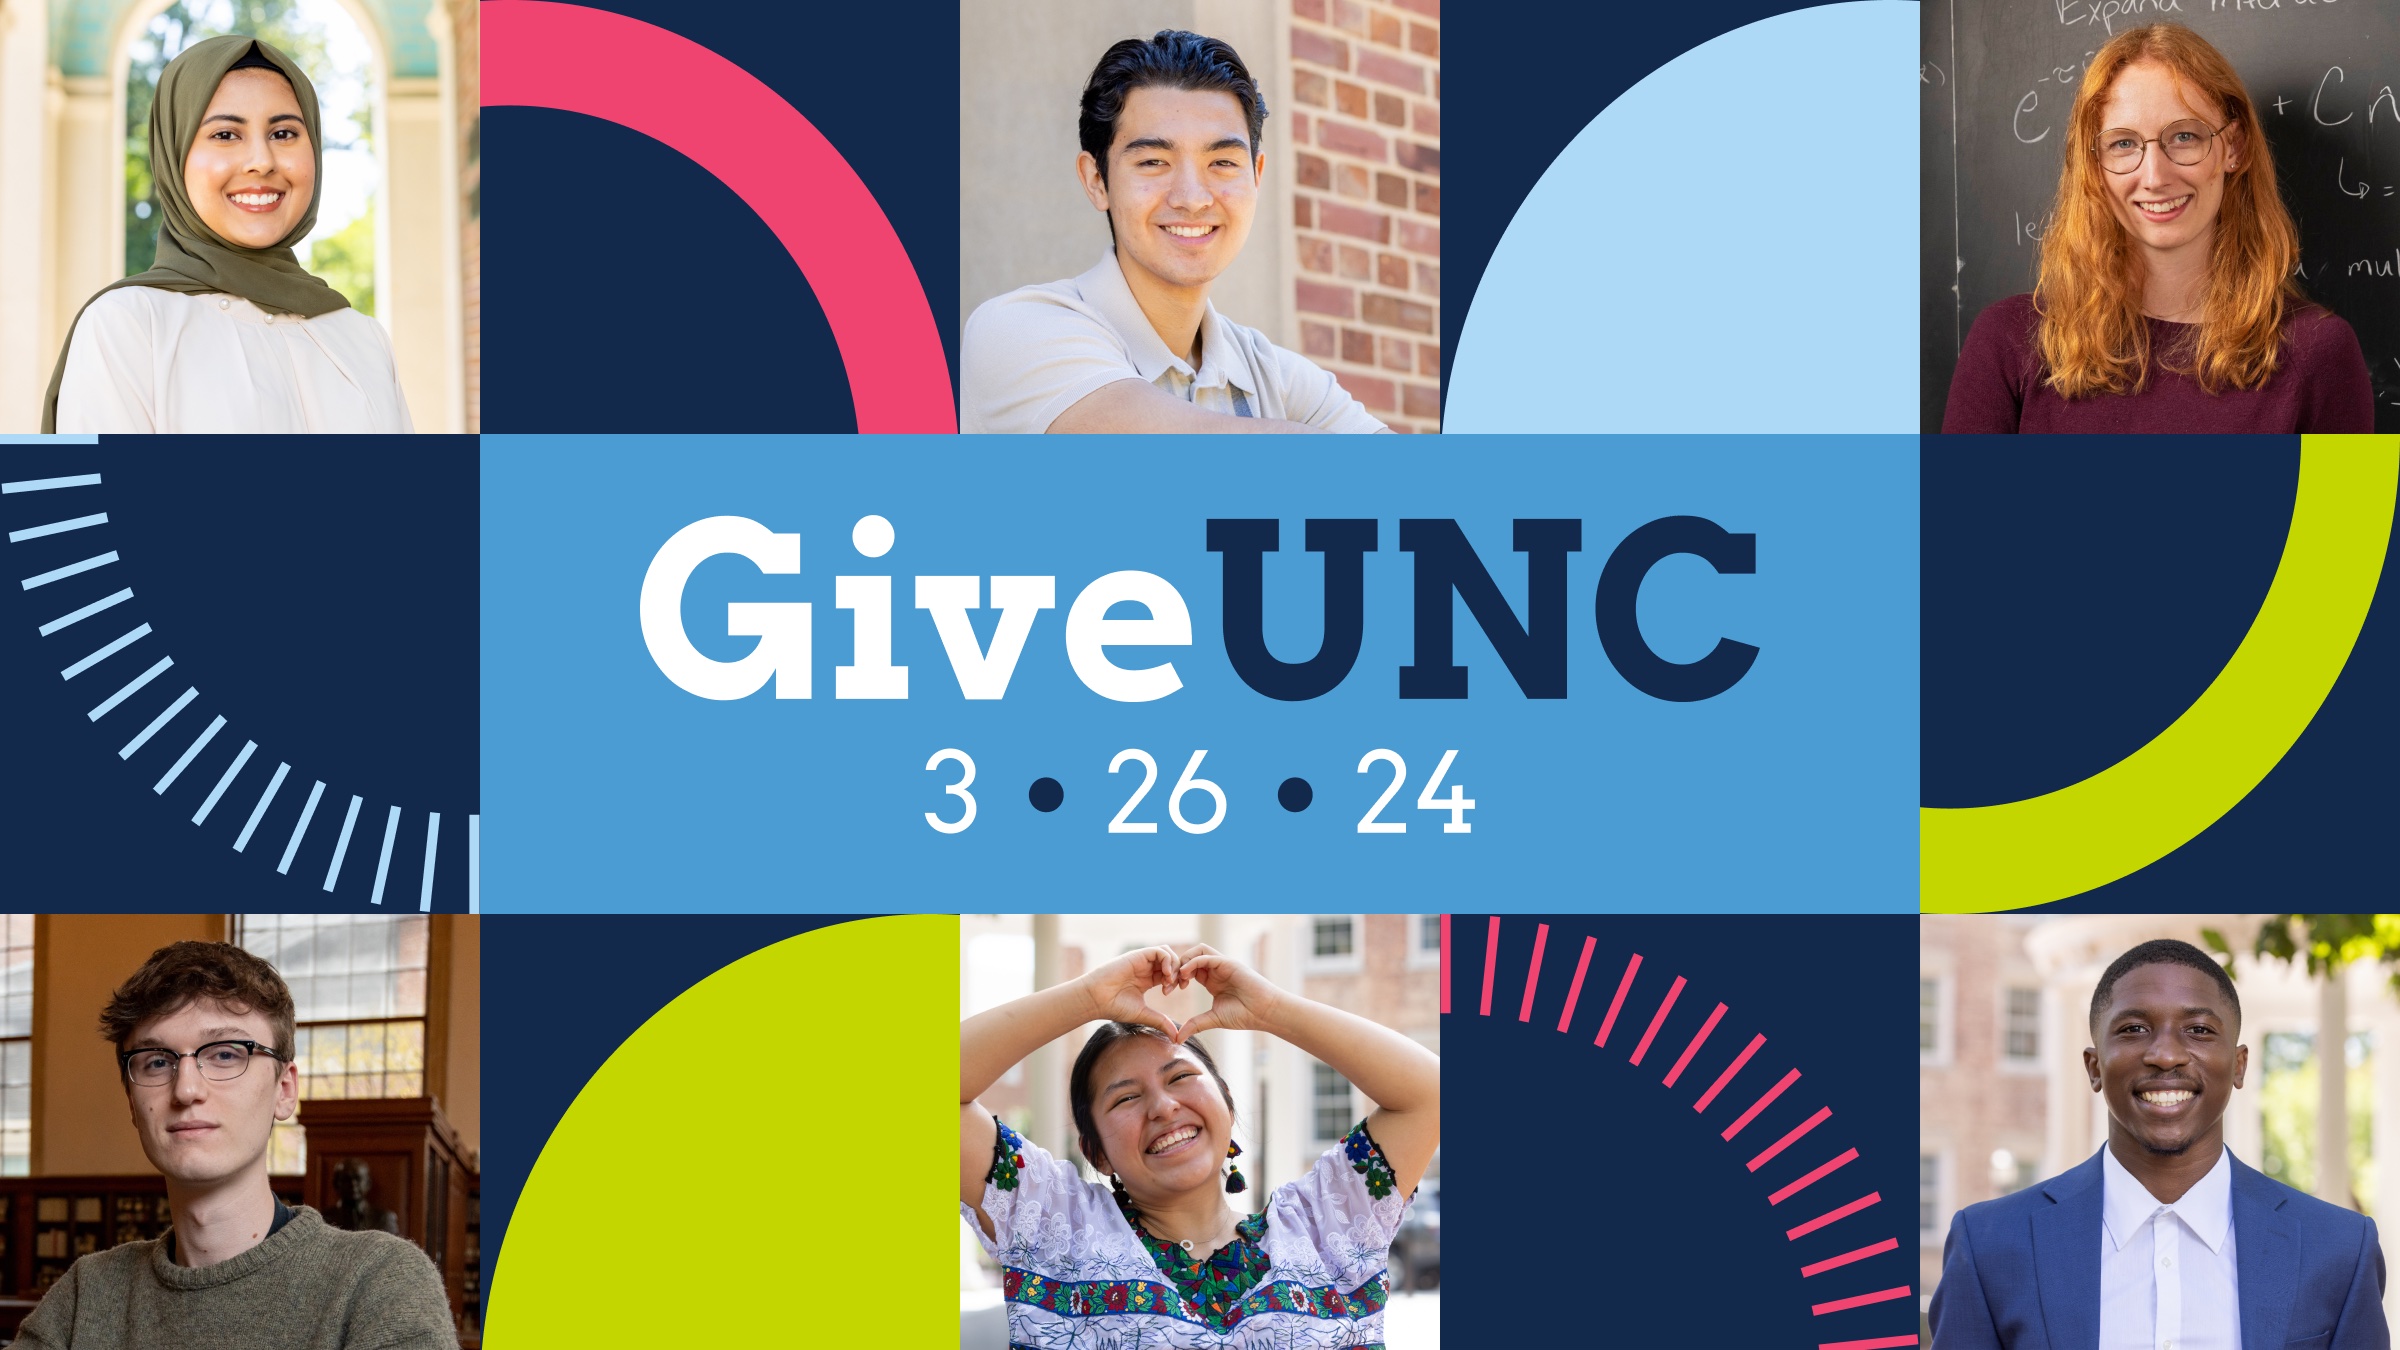 Student pictures over a GiveUNC logo